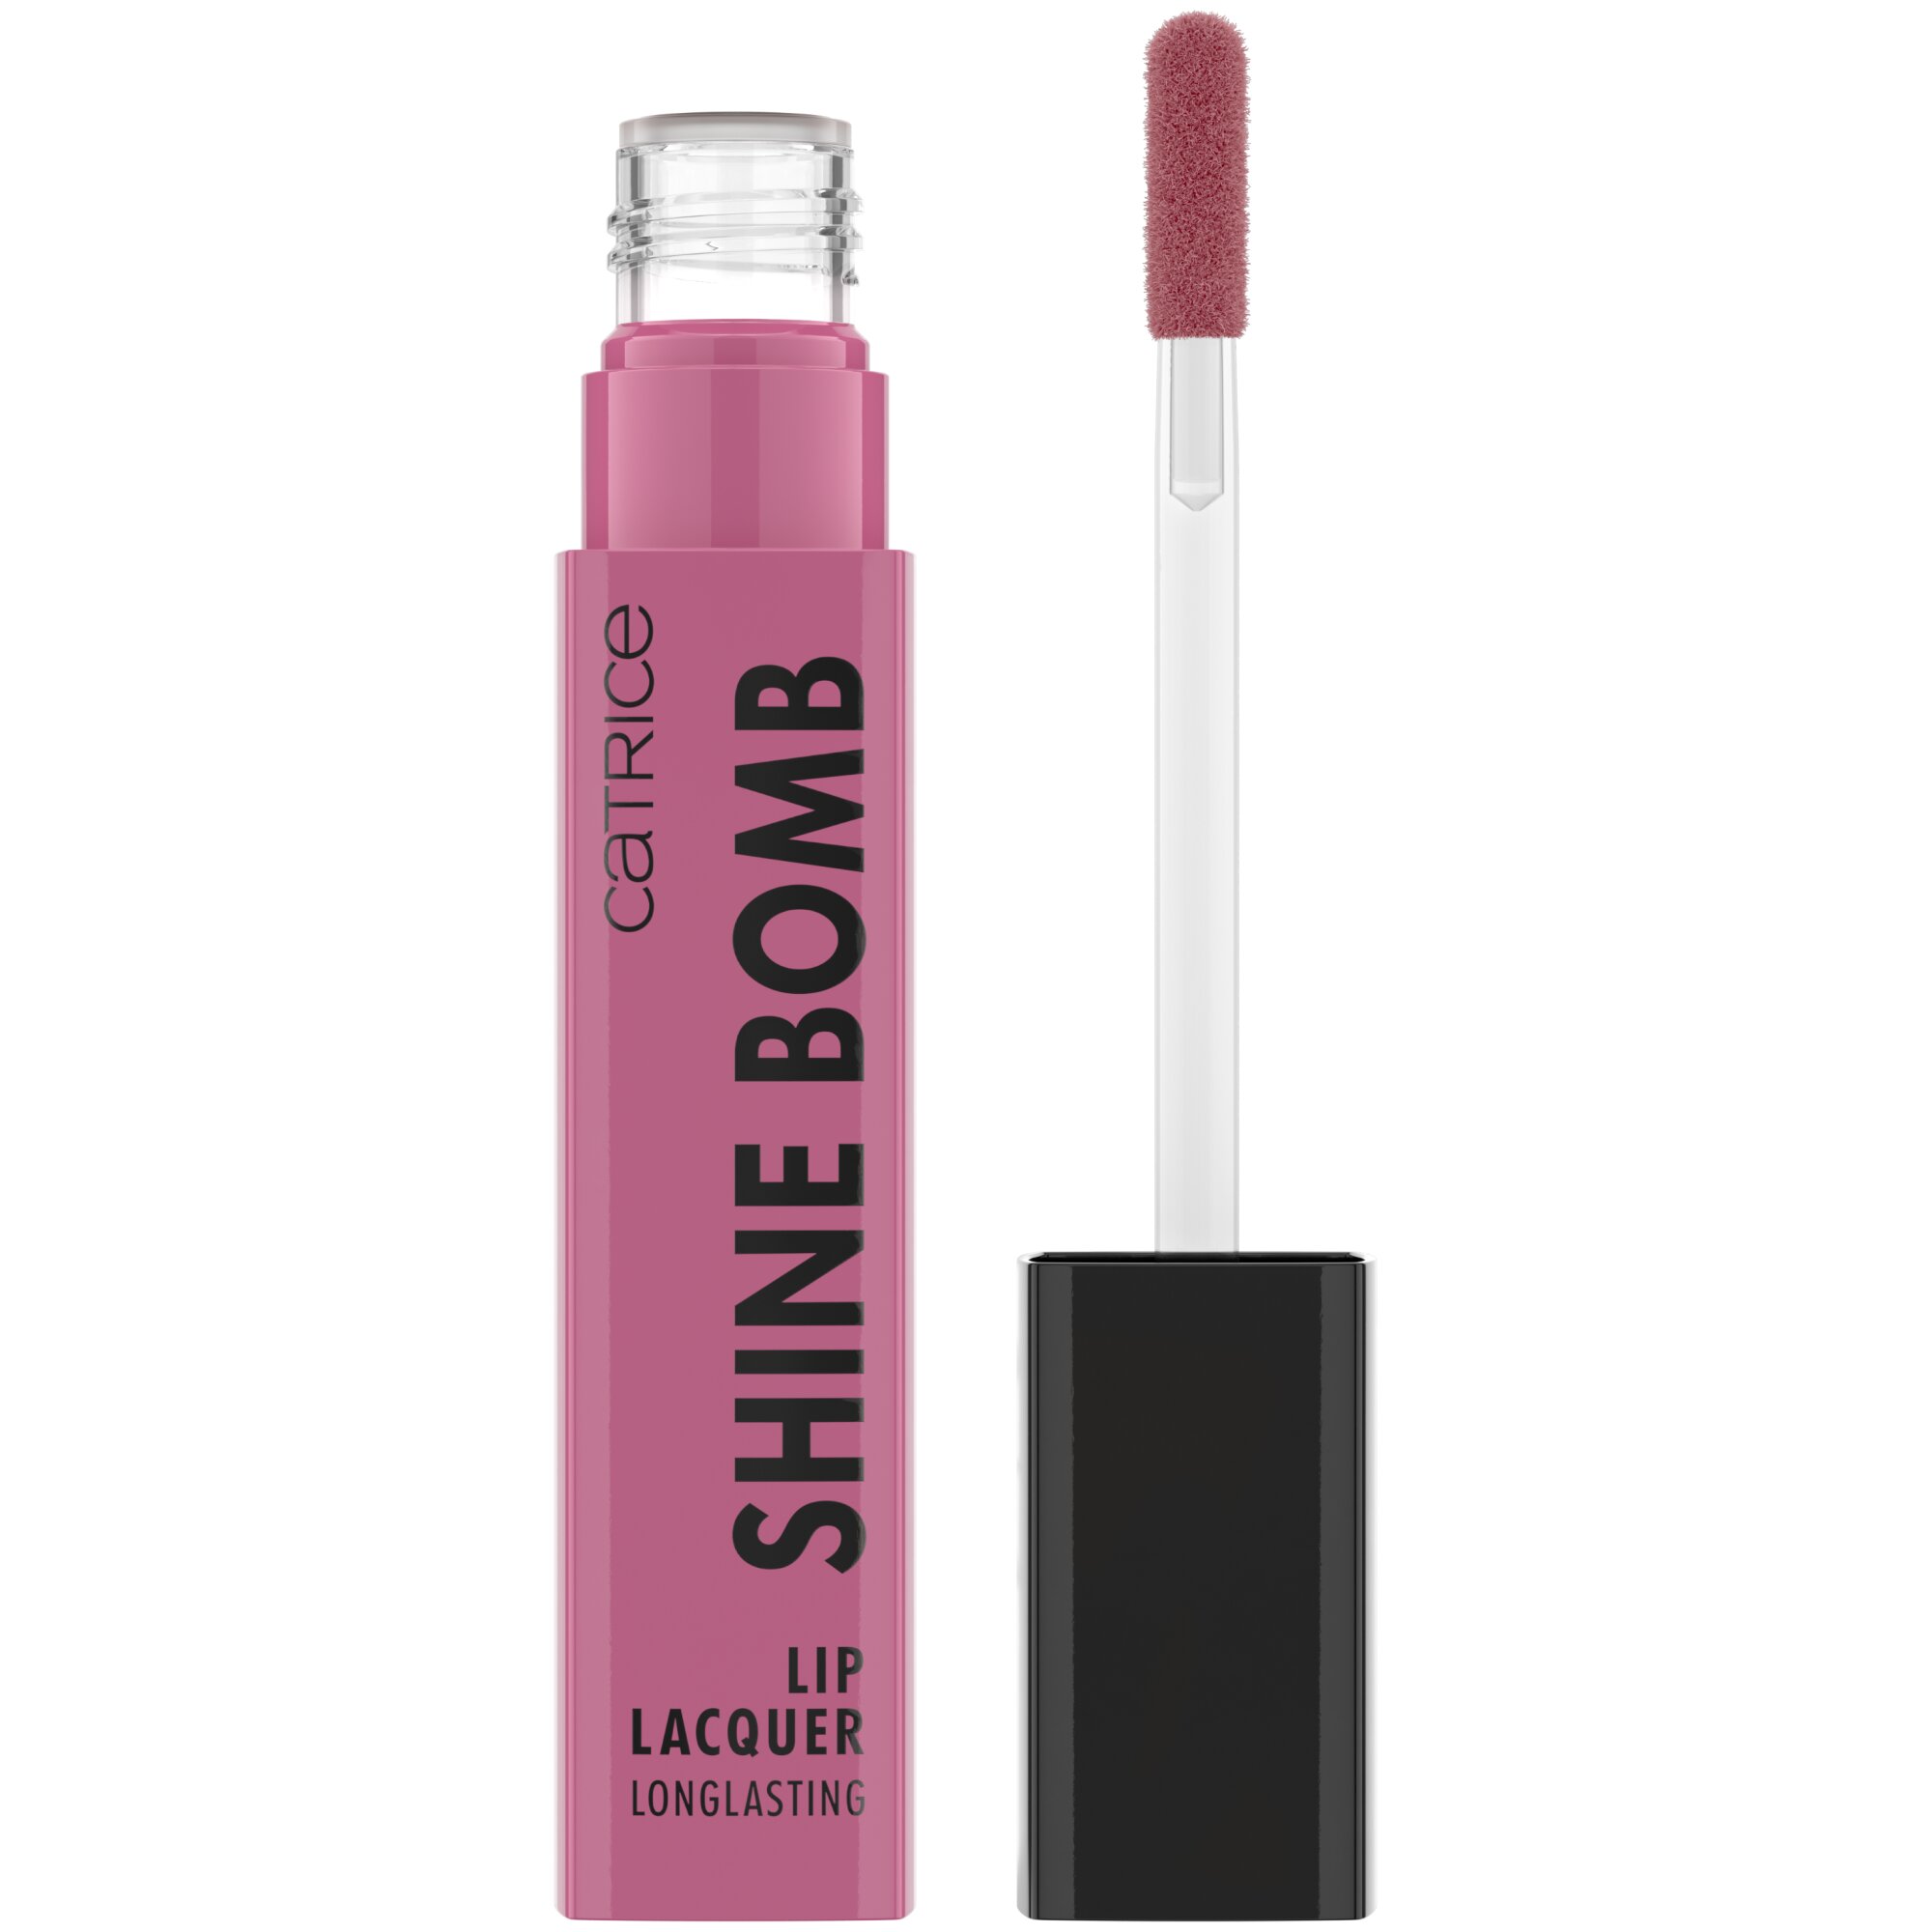 Ruj lichid Shine Bomb Lip Lacquer, 060 - Pinky Promise, 3 ml, Catrice